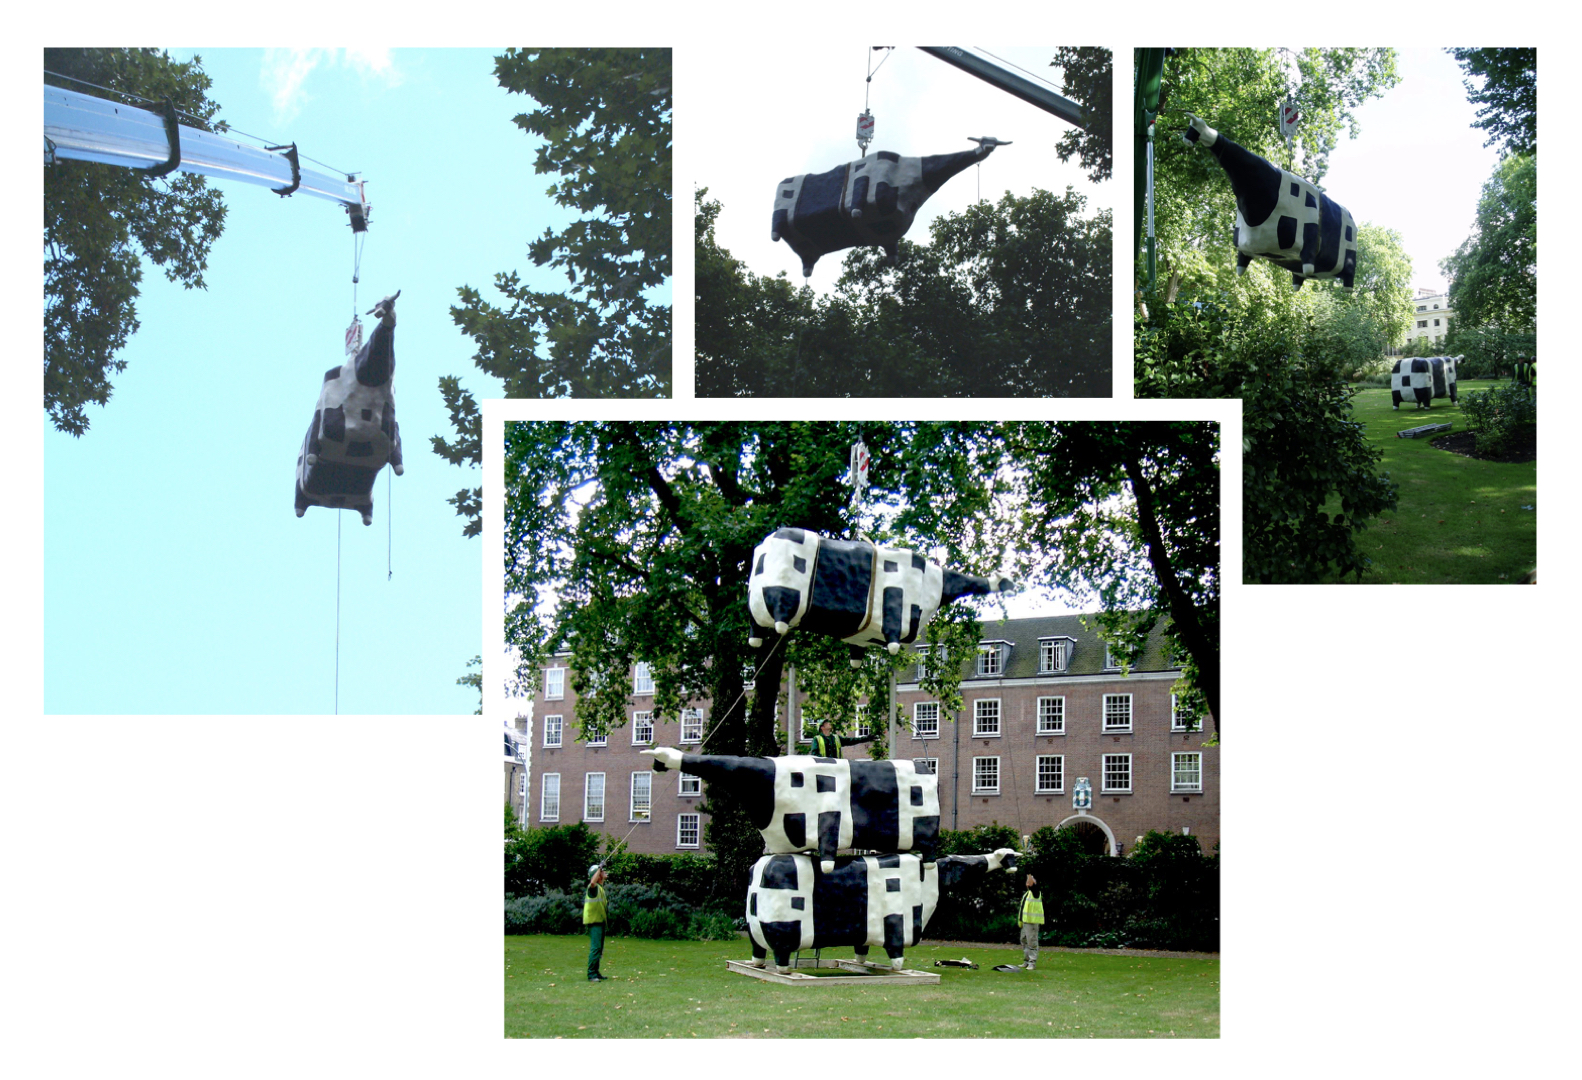 John Kelly: Three Cows in a Pile, Mecklenburgh Square, London, 2005